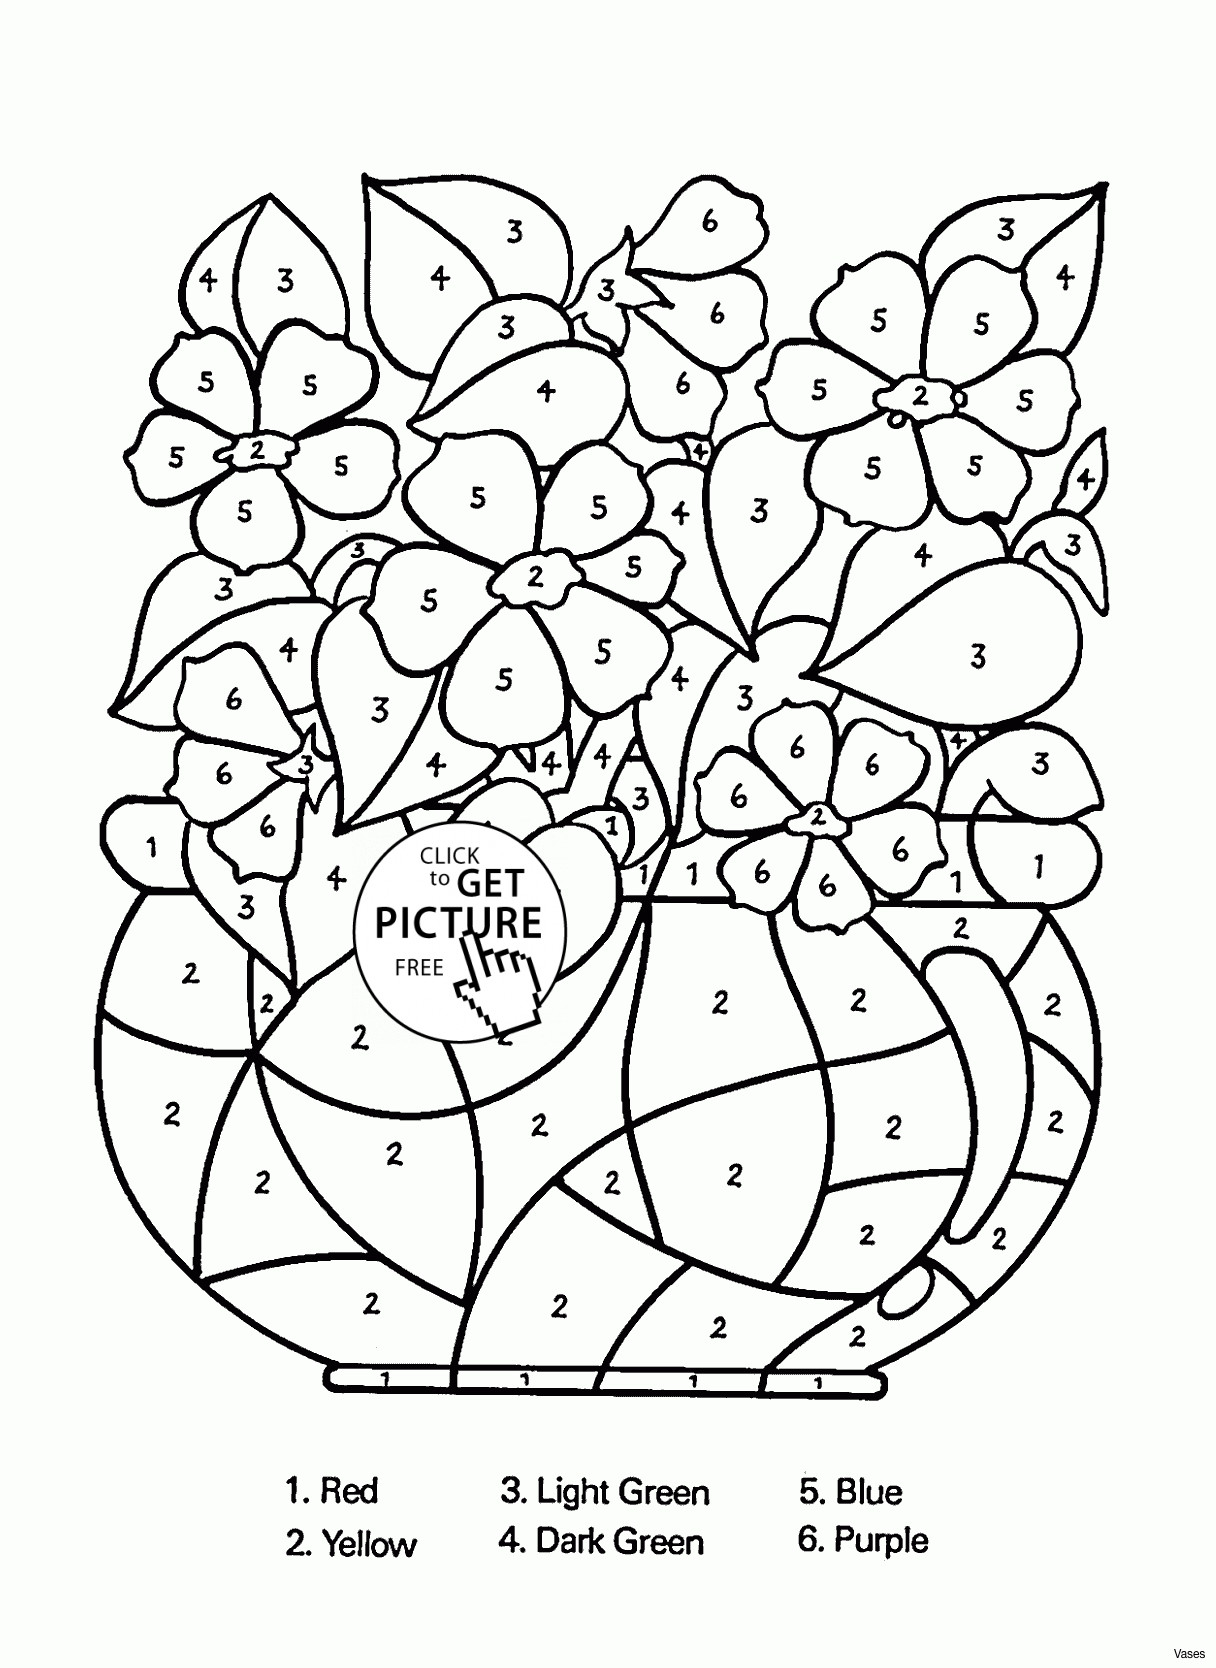 11 Elegant Tall Slim Vases Cheap 2024 free download tall slim vases cheap of cool vases flower vase coloring page pages flowers in a top i 0d pertaining to interesting coloring pages cool vases flower vase coloring page pages flowers in a top